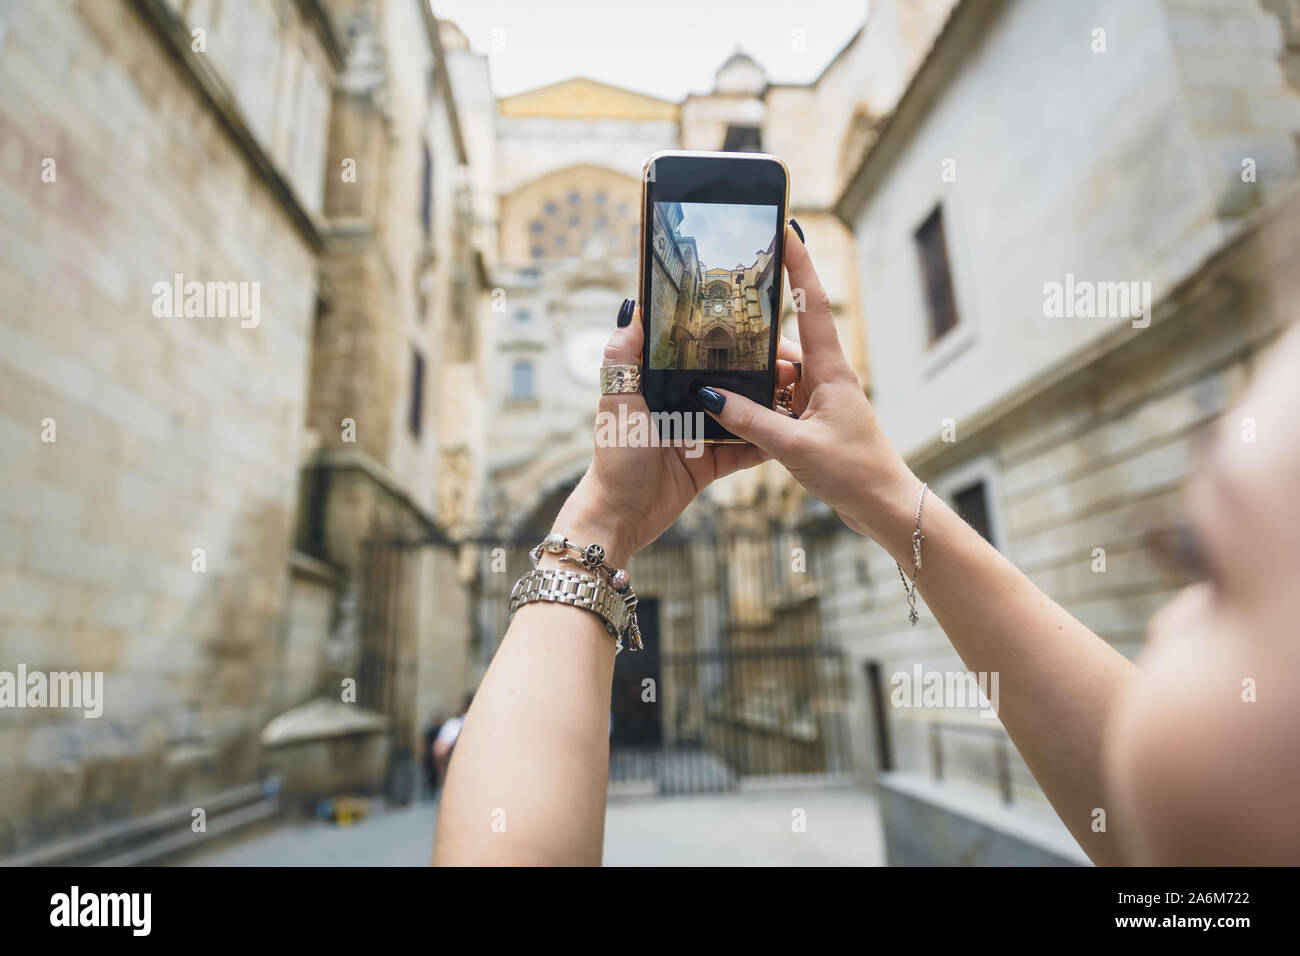 Girl makes a photo or video on the phone. Hands hold a smartphone and make a photo with landmark in the europe old town Stock Photo